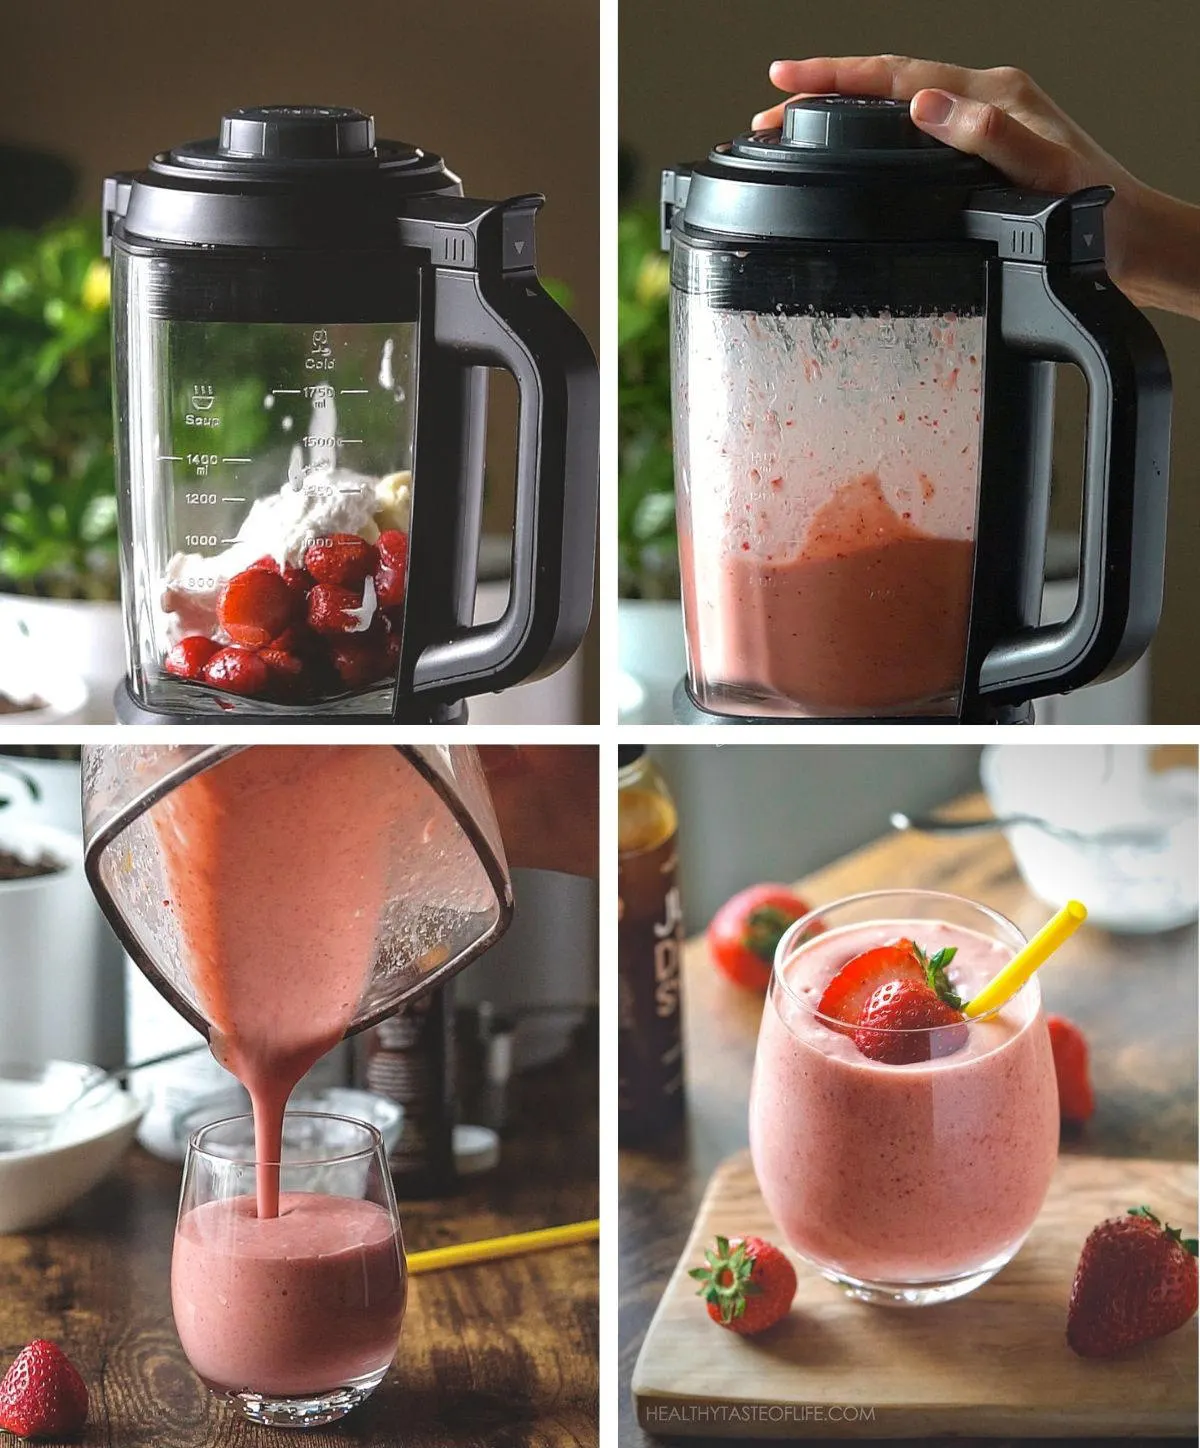 Process shots showing step by step on how to make a strawberry banana milkshake in a blender.